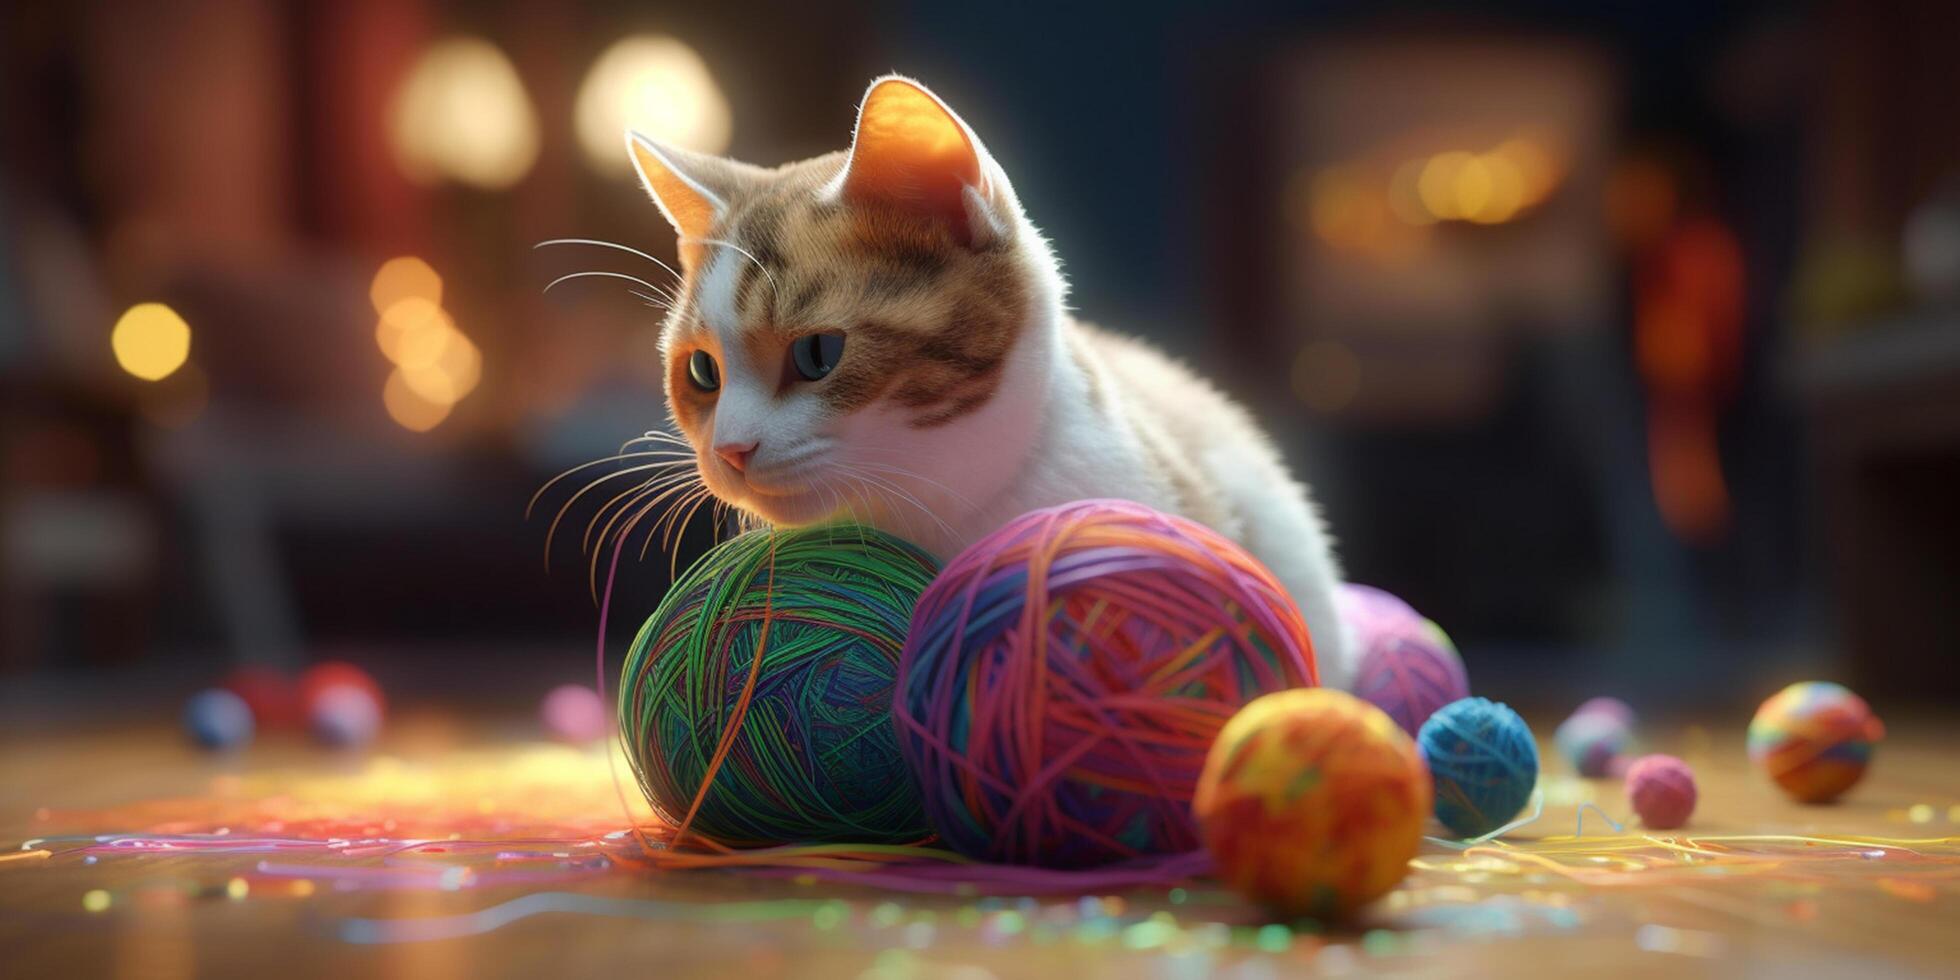 Playful Cat with Colorful Wool Balls photo